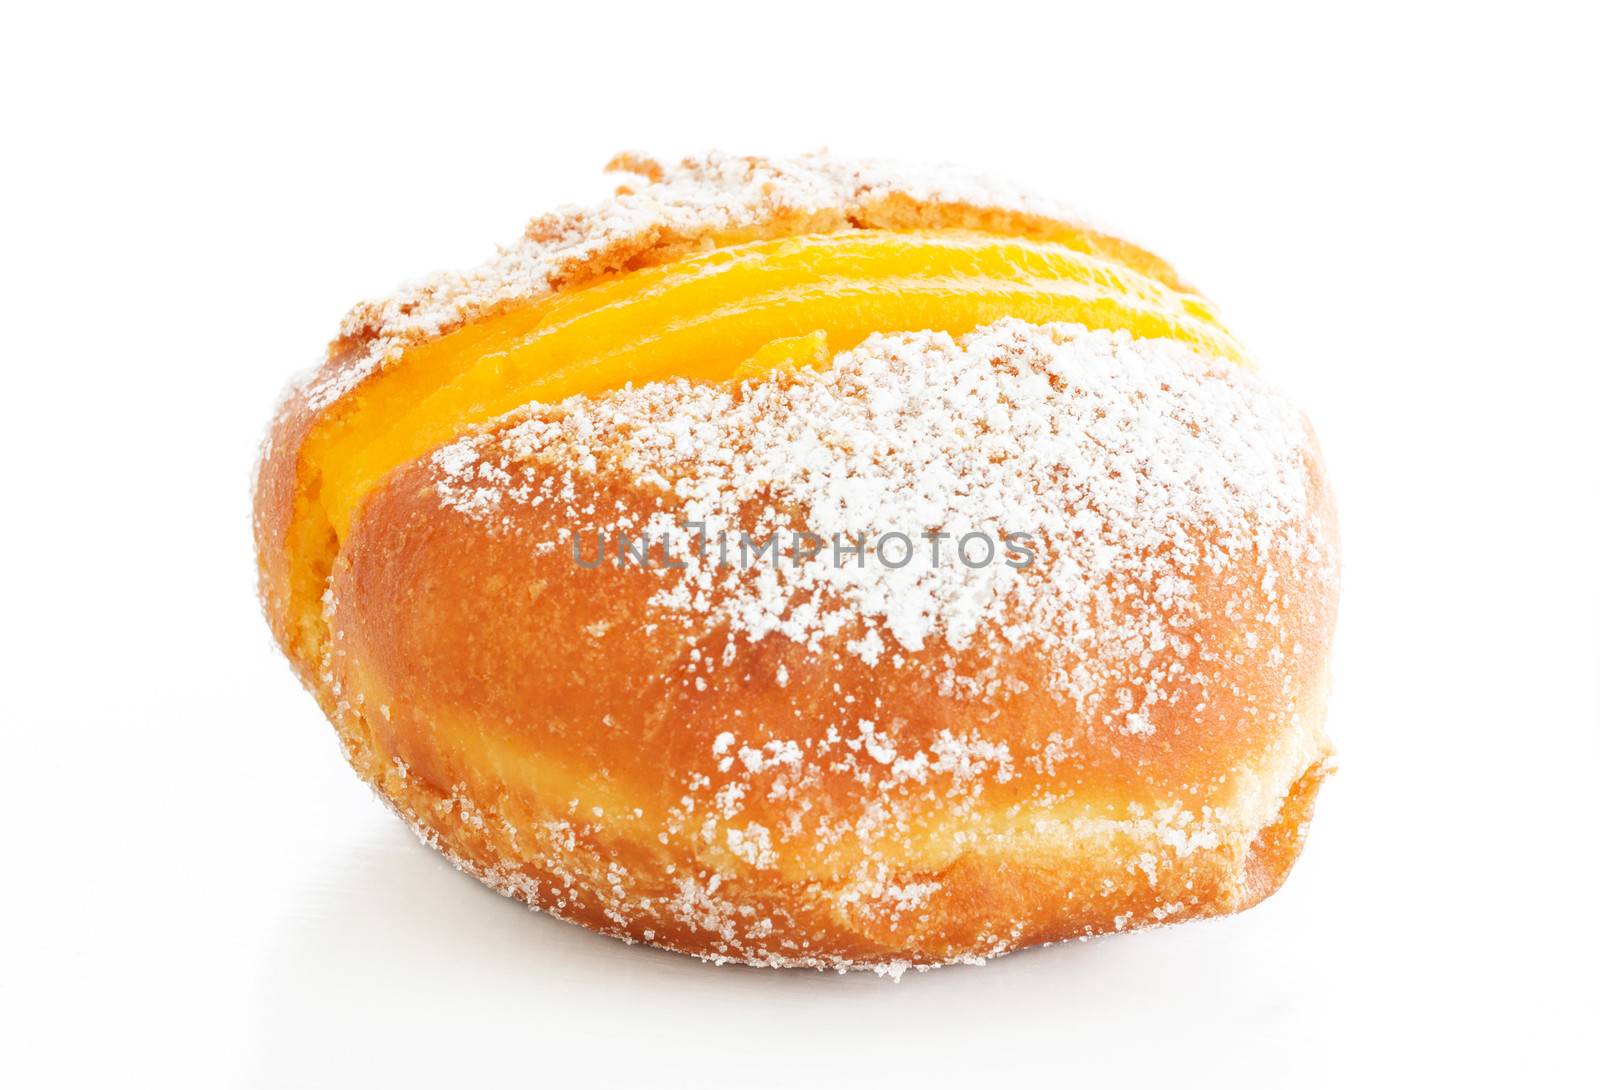 Berliner with egg creme over white and sugar by simas2